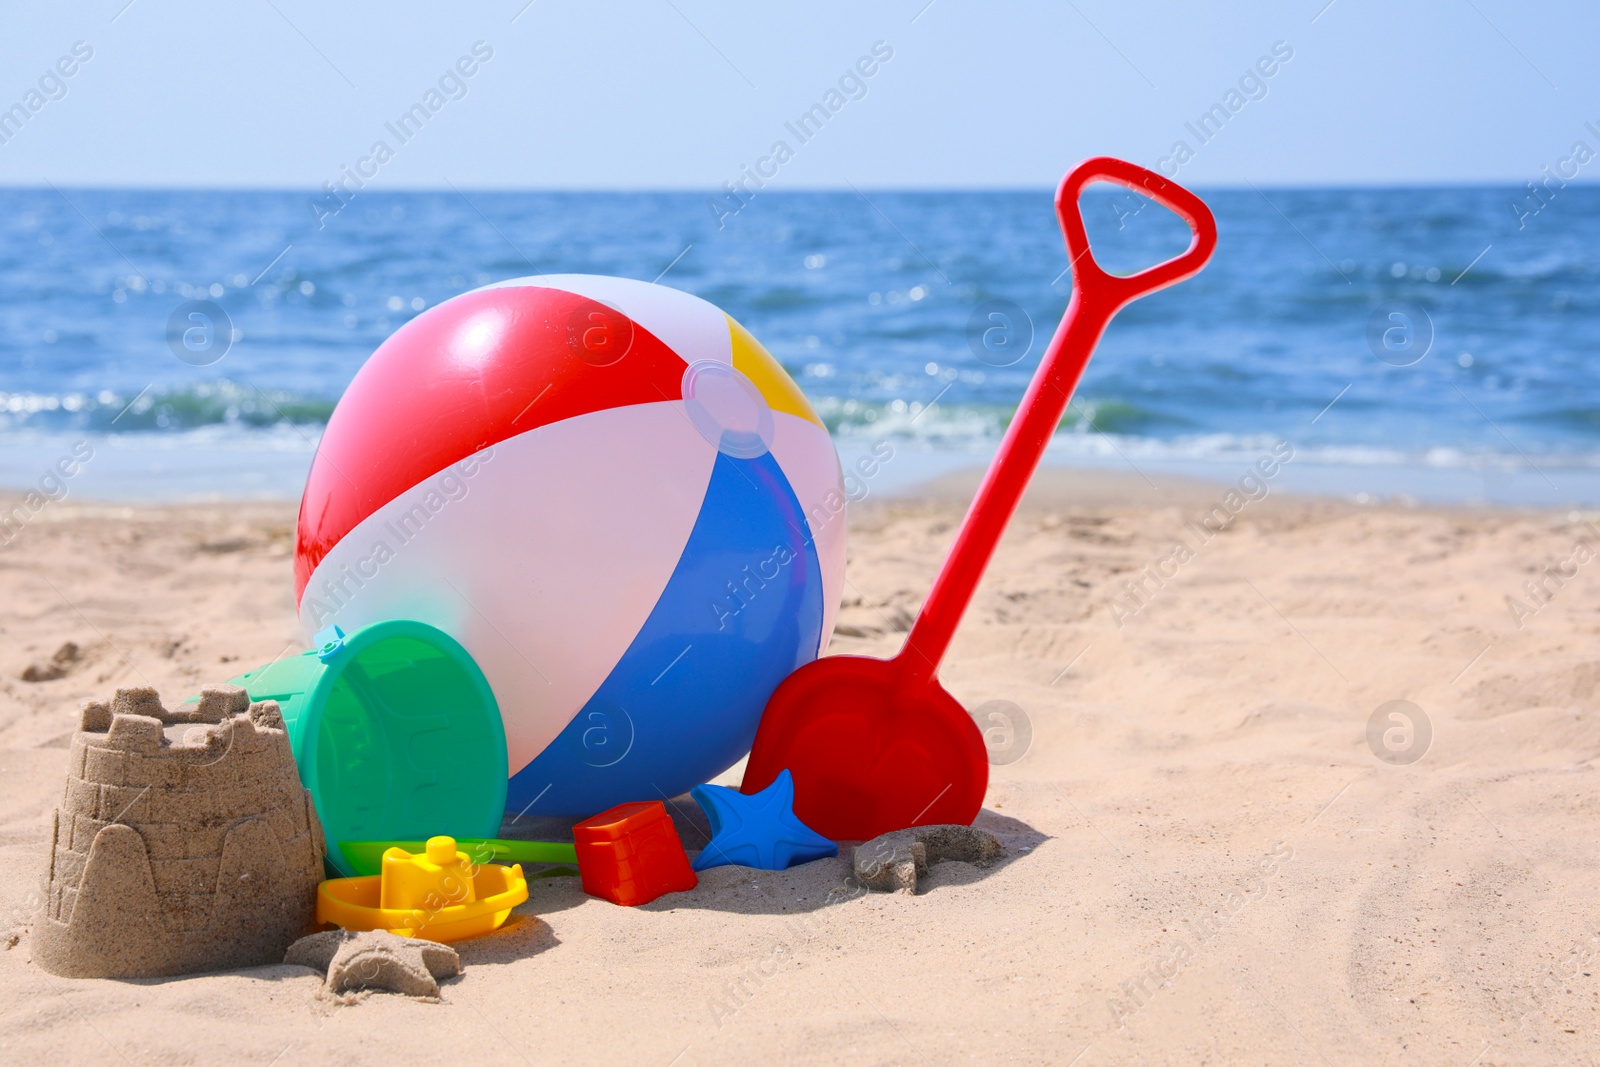 Photo of Different sand toys and beach ball near sea